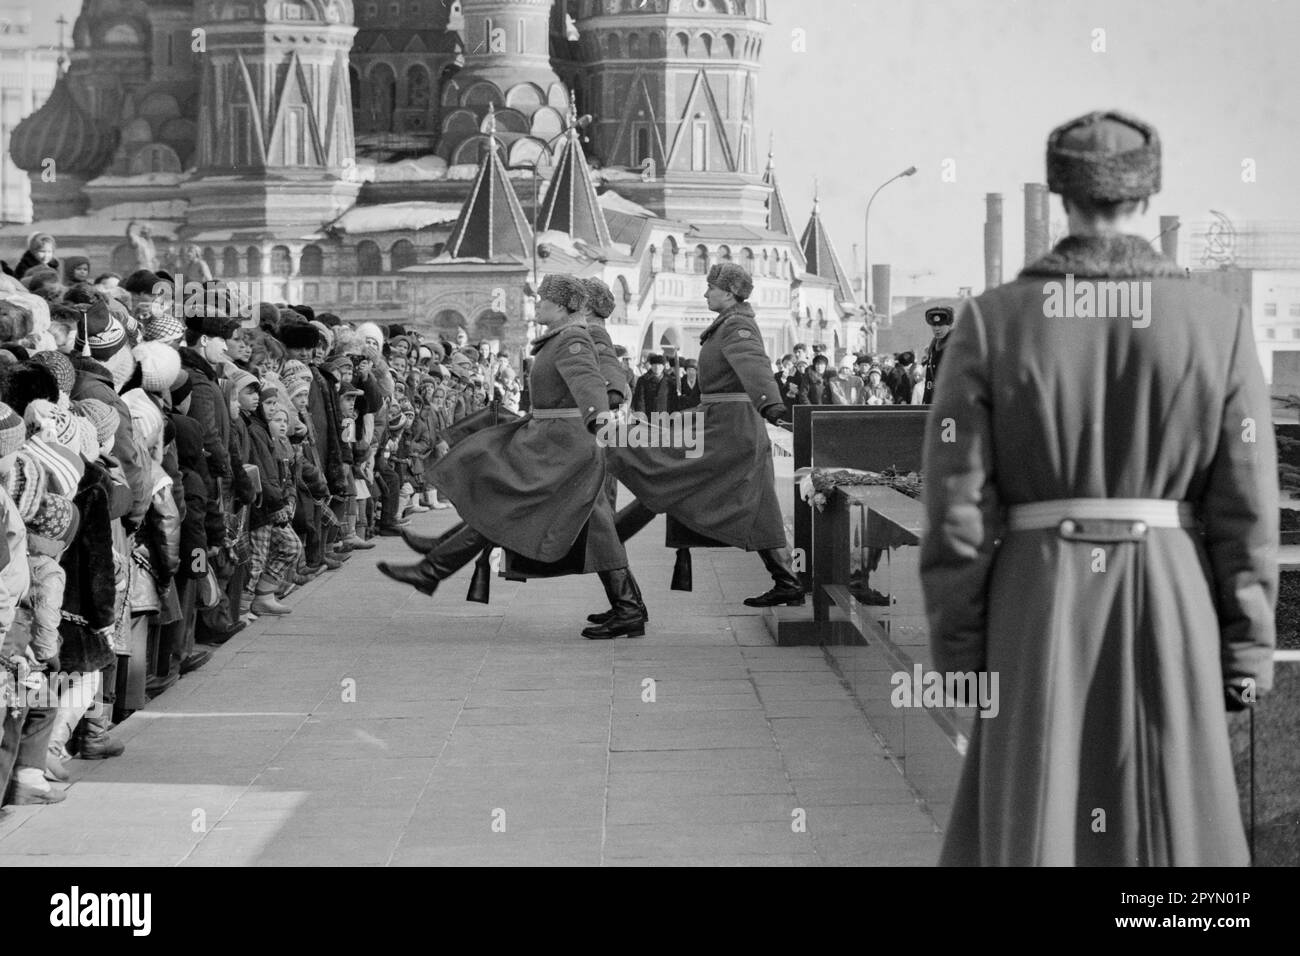 1985: A crowd watches the changing of the honour guard at Lenin’s mausoleum in Moscow’s Red Square in front of St. Basil’s Cathedral. Stock Photo